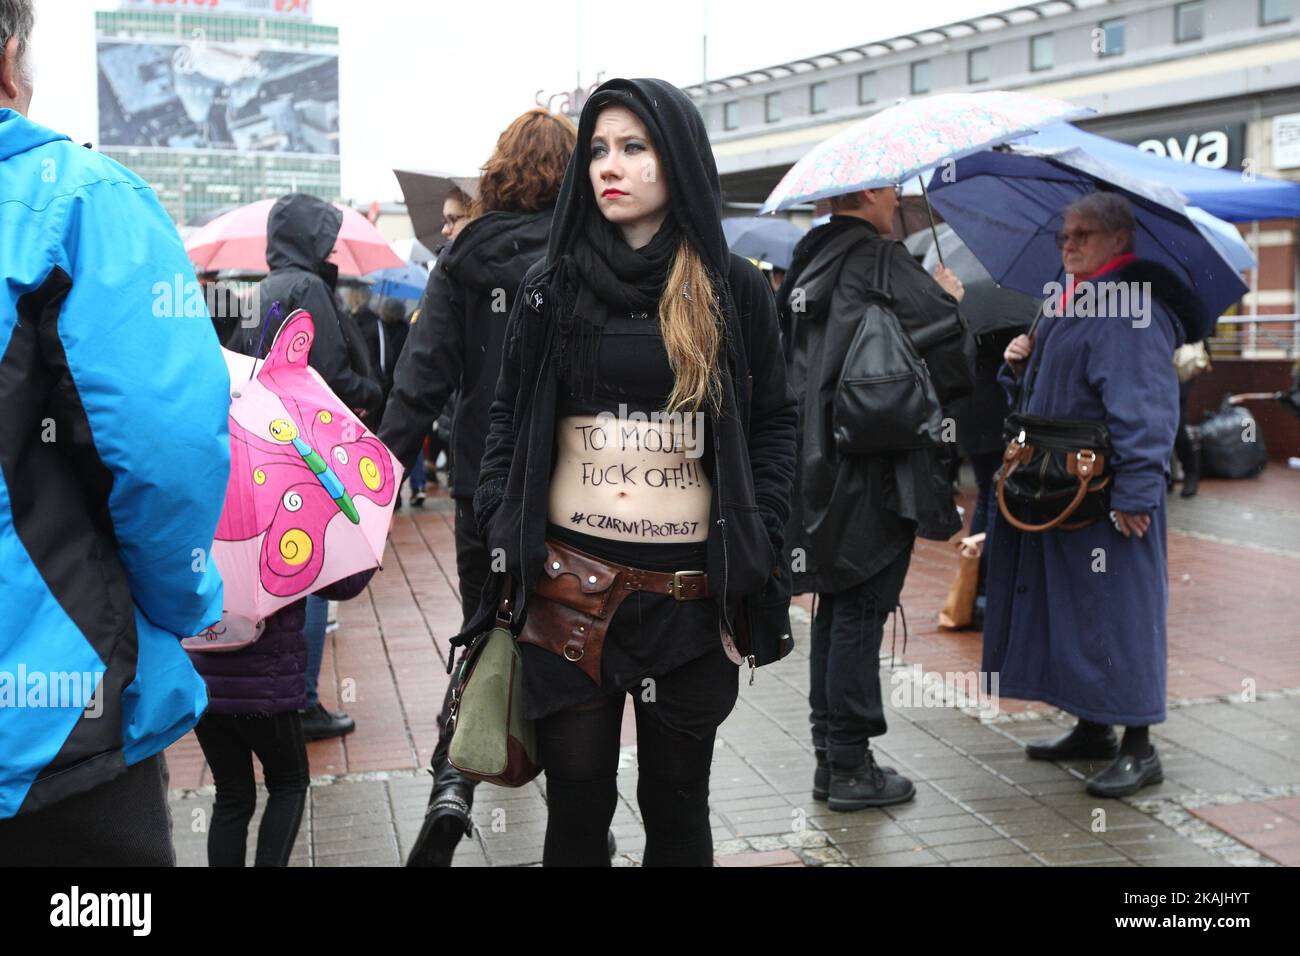 Few thousands people took part in the so-called Black Protest or General Woman Strike in response to a proposed bill to completely ban abortion in the country, in Gdansk, Poland, on October 3, 2016. Proposed new law would criminalise all abortions. The action is organized to express the opposition to the tightening of the anti-abortion law and according to its name all of the participants wear black. Stock Photo